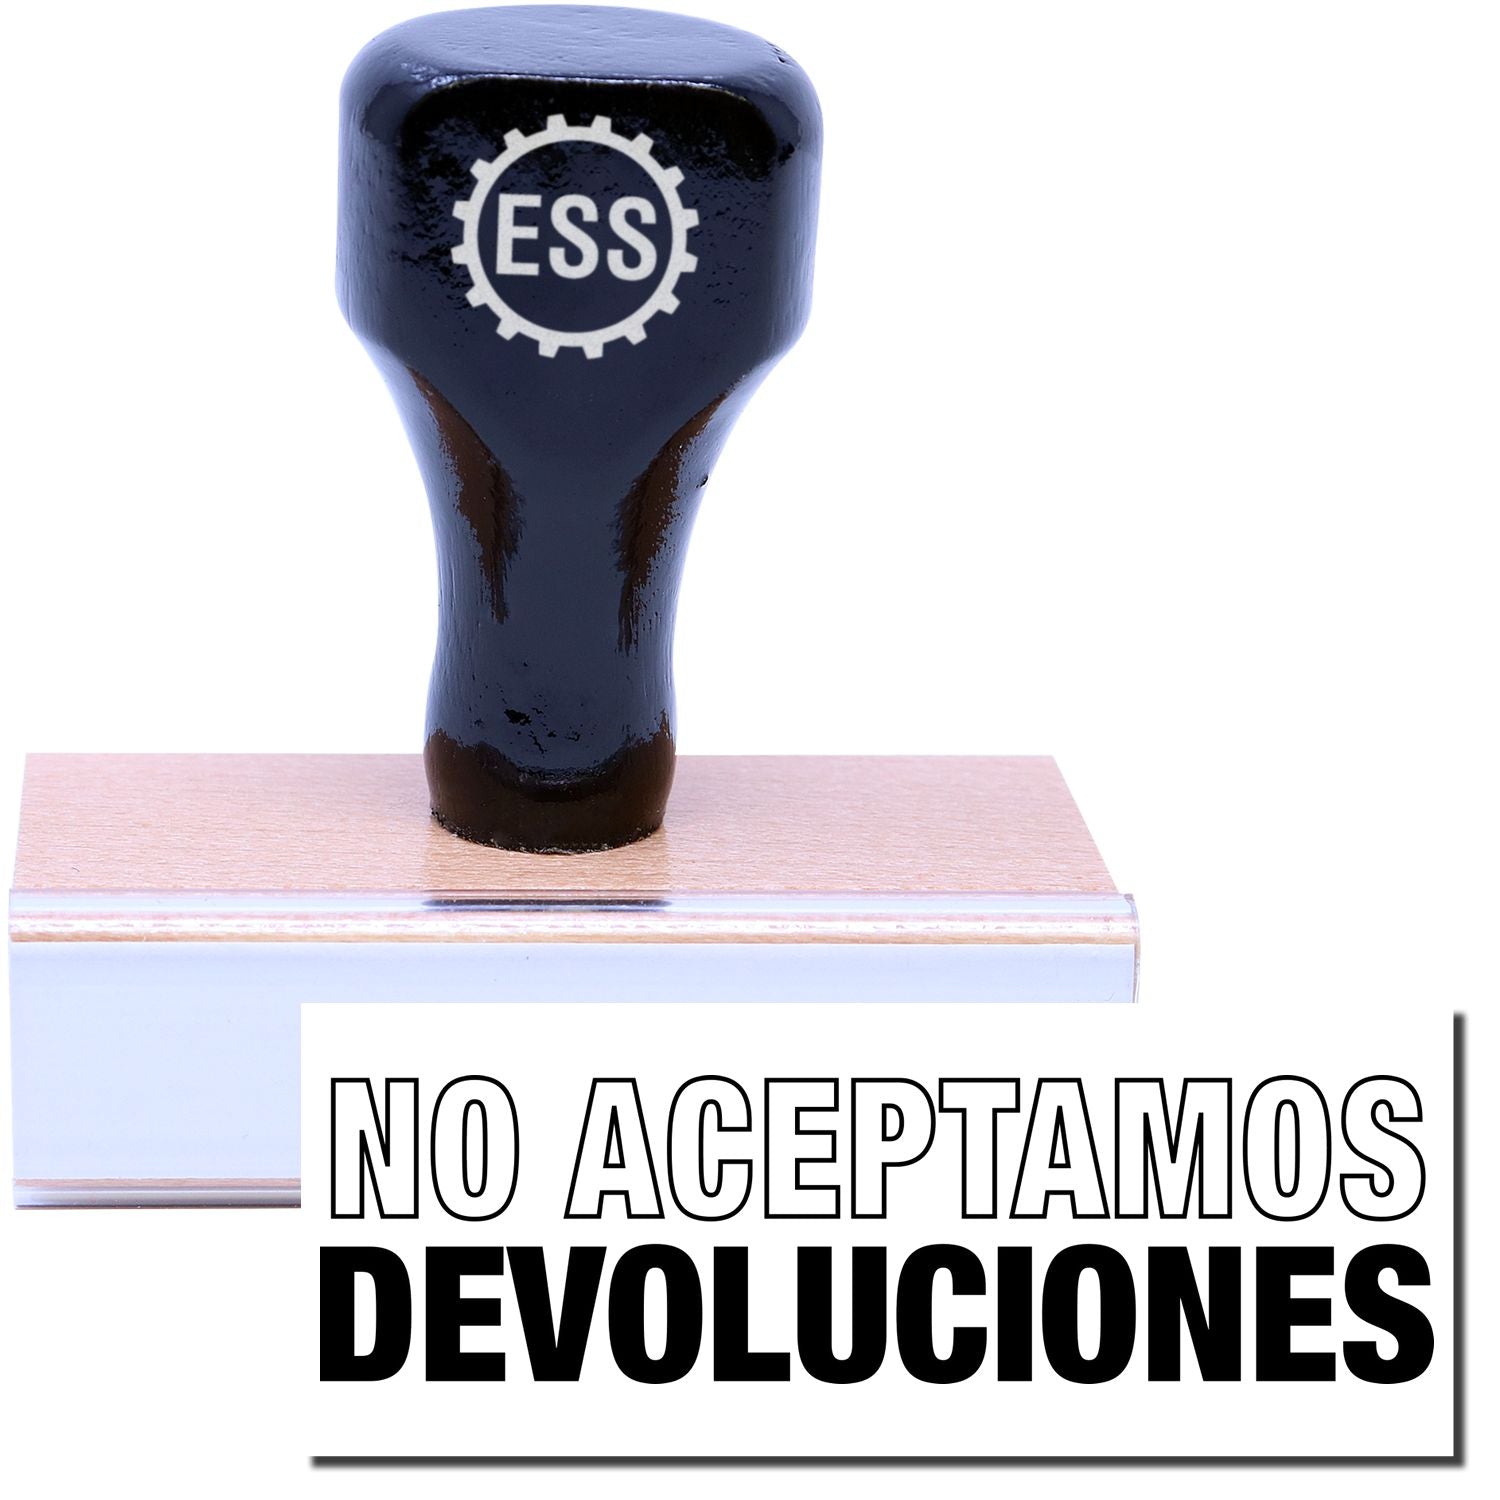 A stock office rubber stamp with a stamped image showing how the text "NO ACEPTAMOS DEVOLUCIONES" ("NO ACEPTAMOS" in an outline font) in a large font is displayed after stamping.